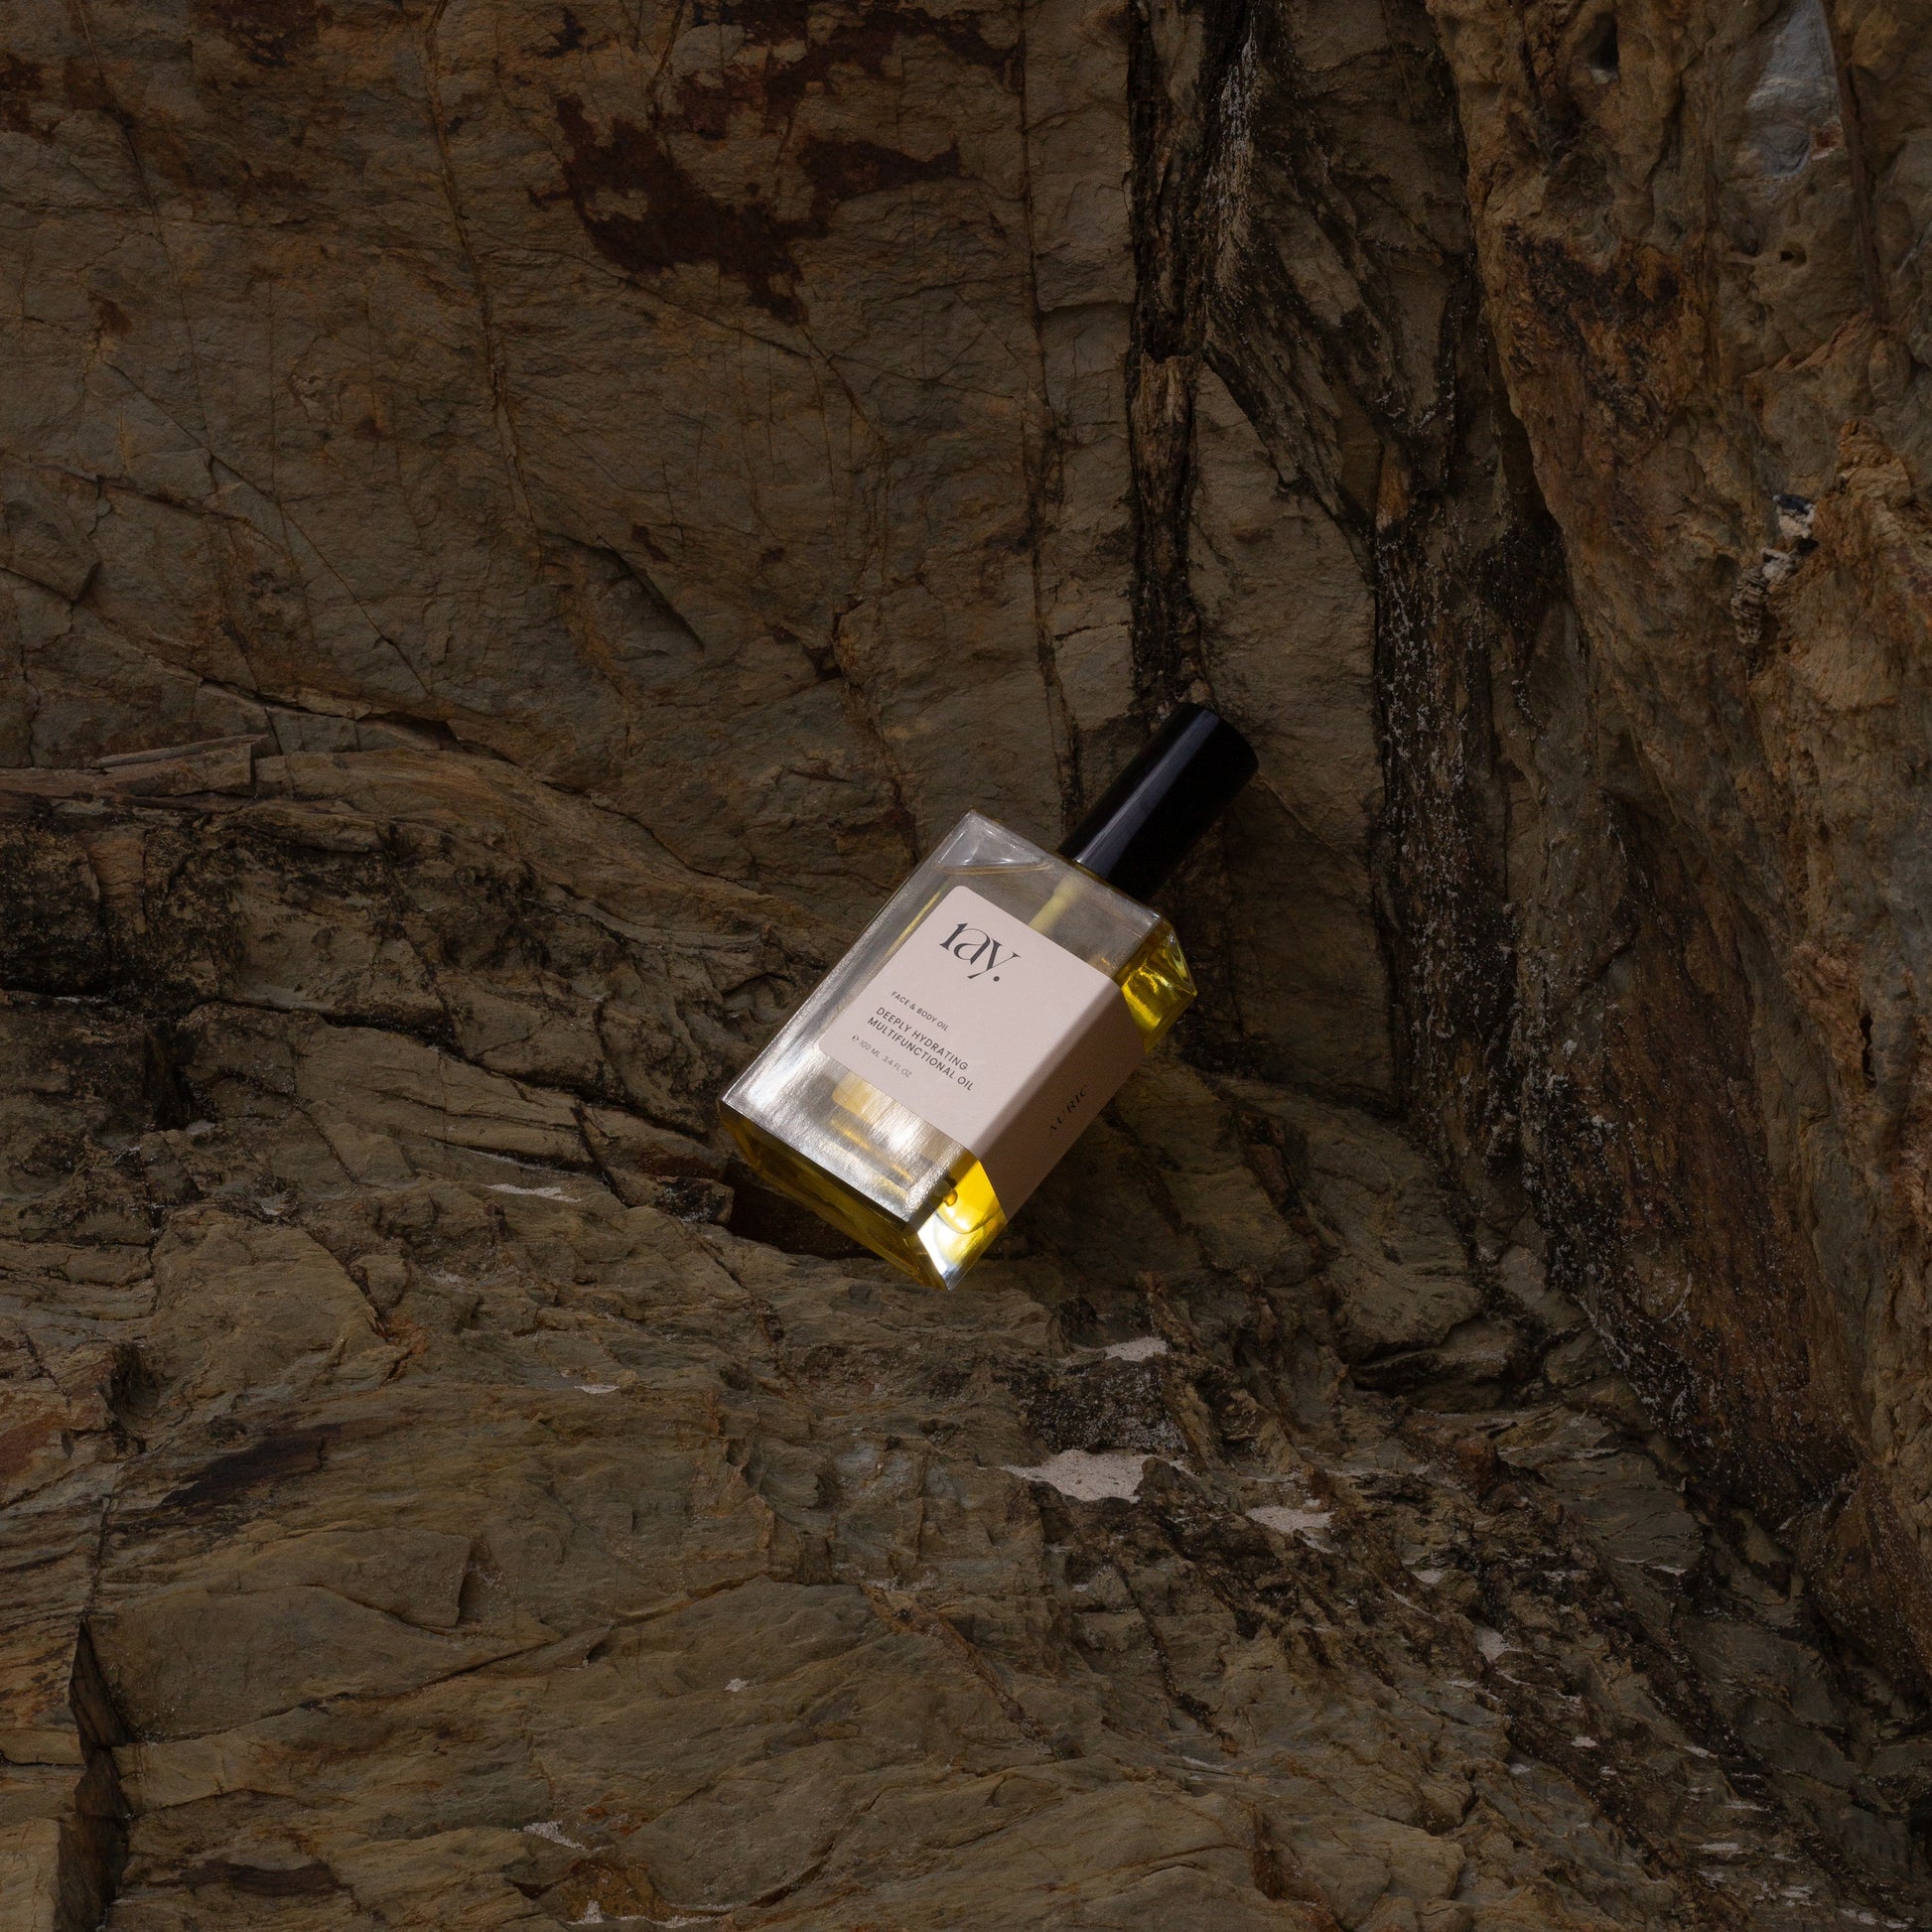 A natural hydrating body and face oil laying at the beach amongst organic rocks